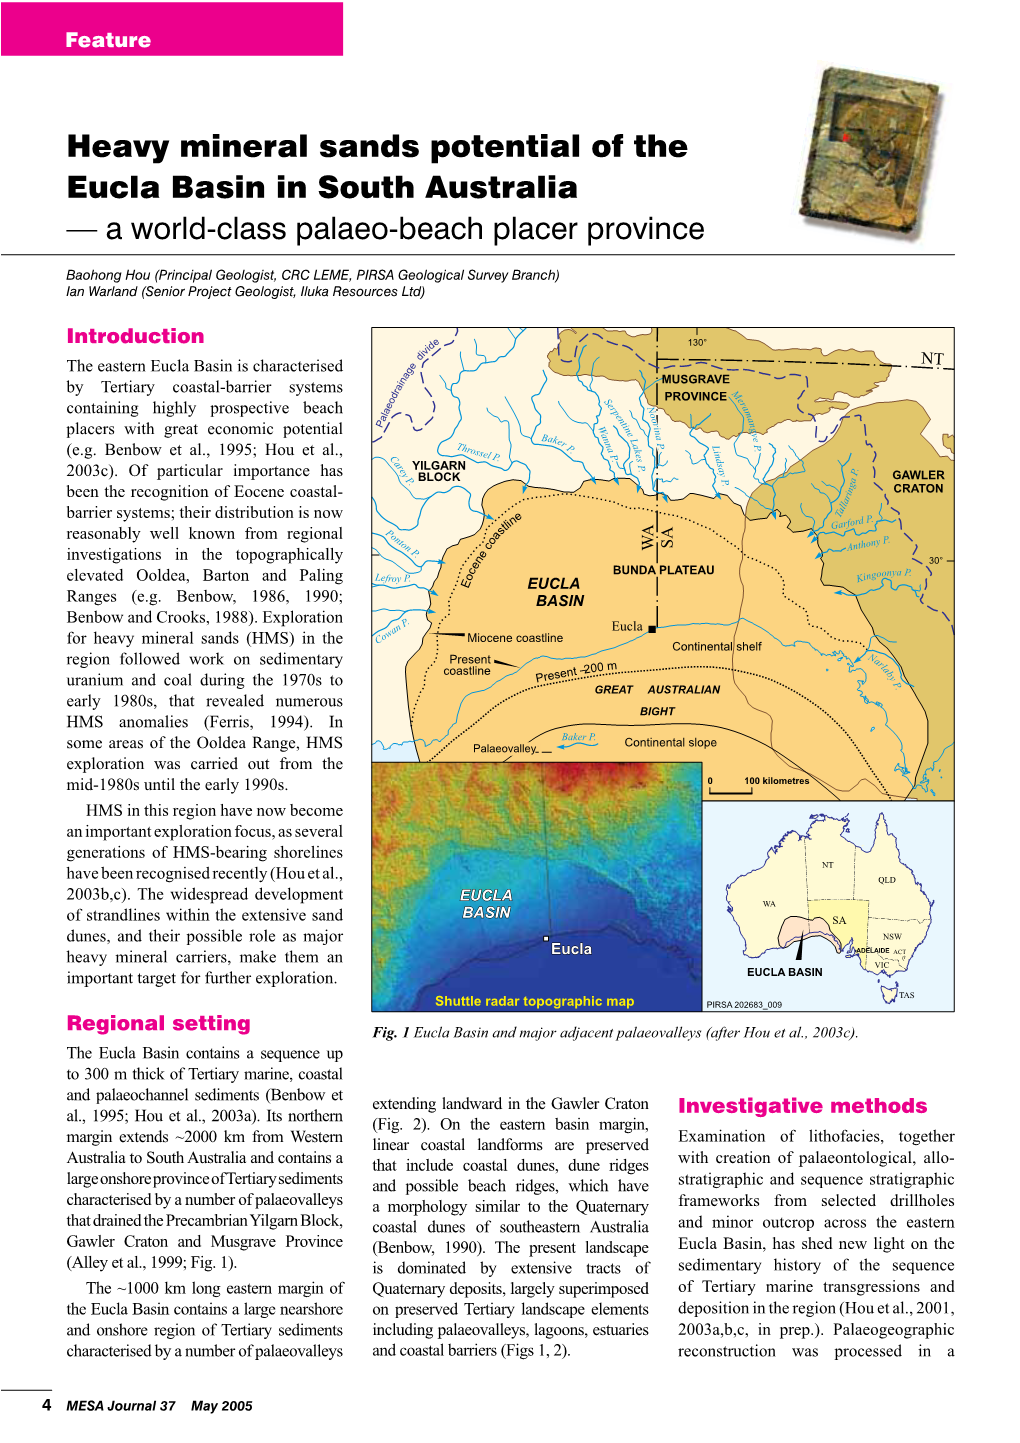 Heavy Mineral Sands Potential of the Eucla Basin in South Australia — a World-Class Palaeo-Beach Placer Province